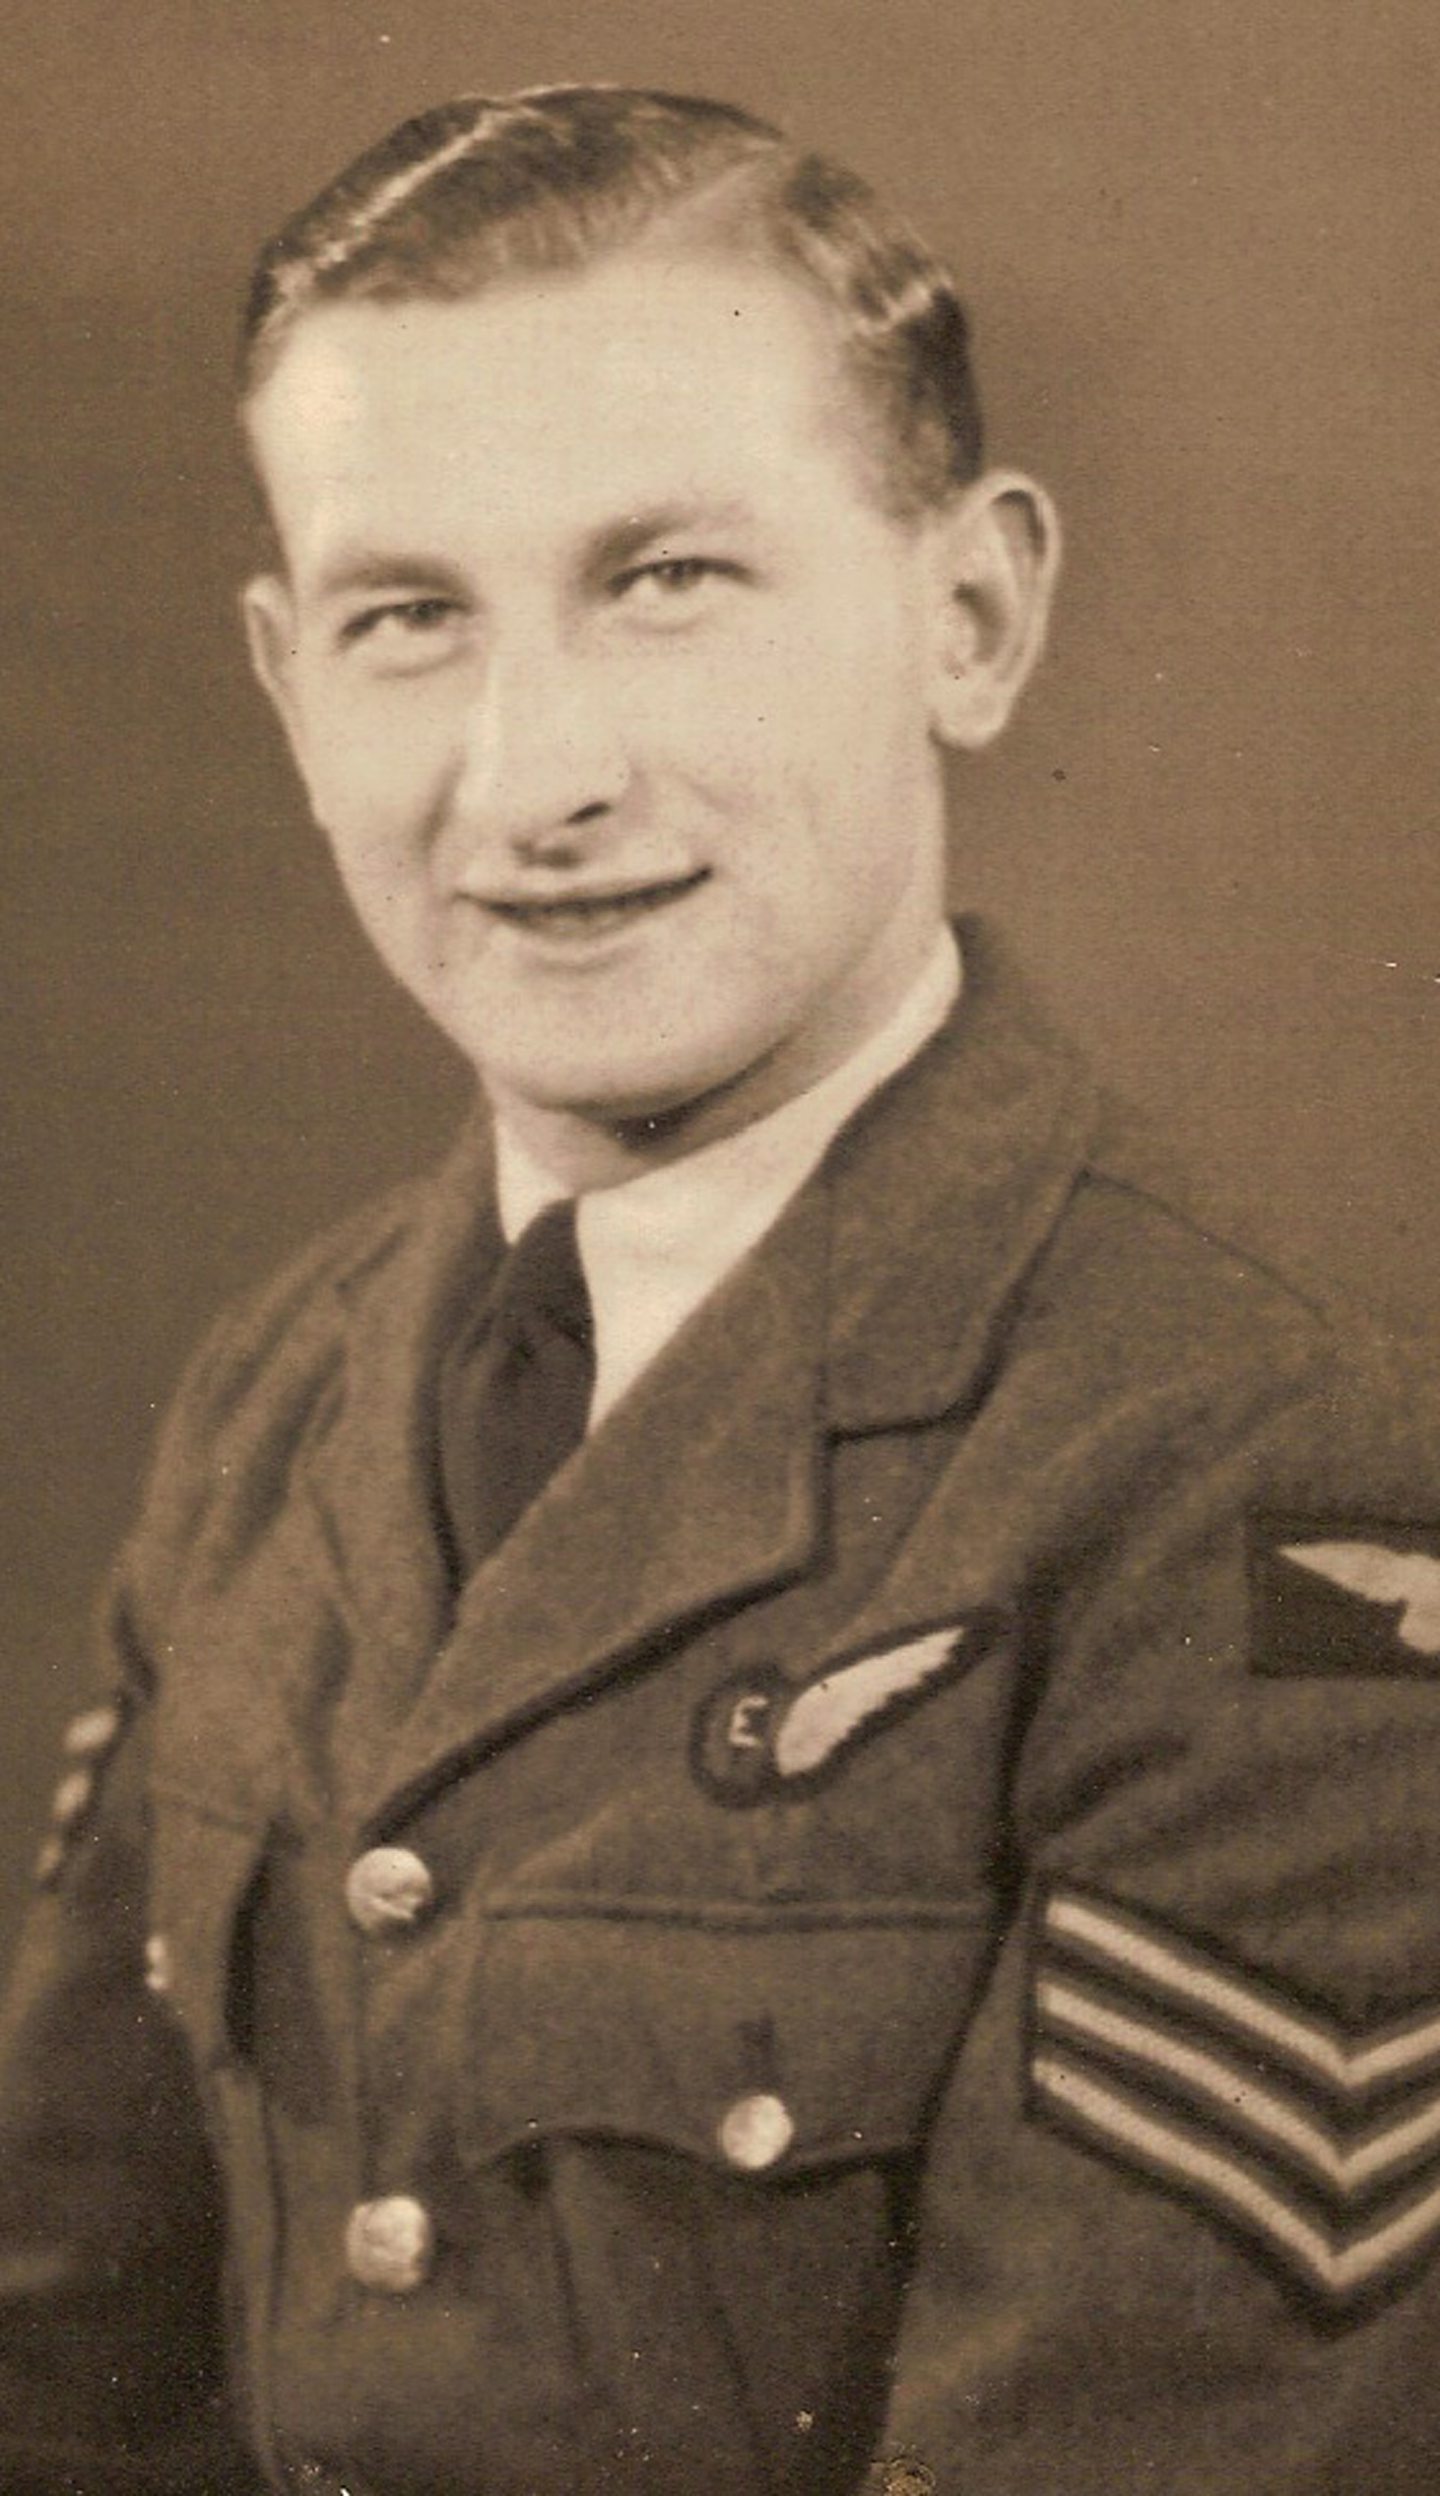 Sergeant John Kinnear was among the Dambusters heroes killed in the 1943 operation